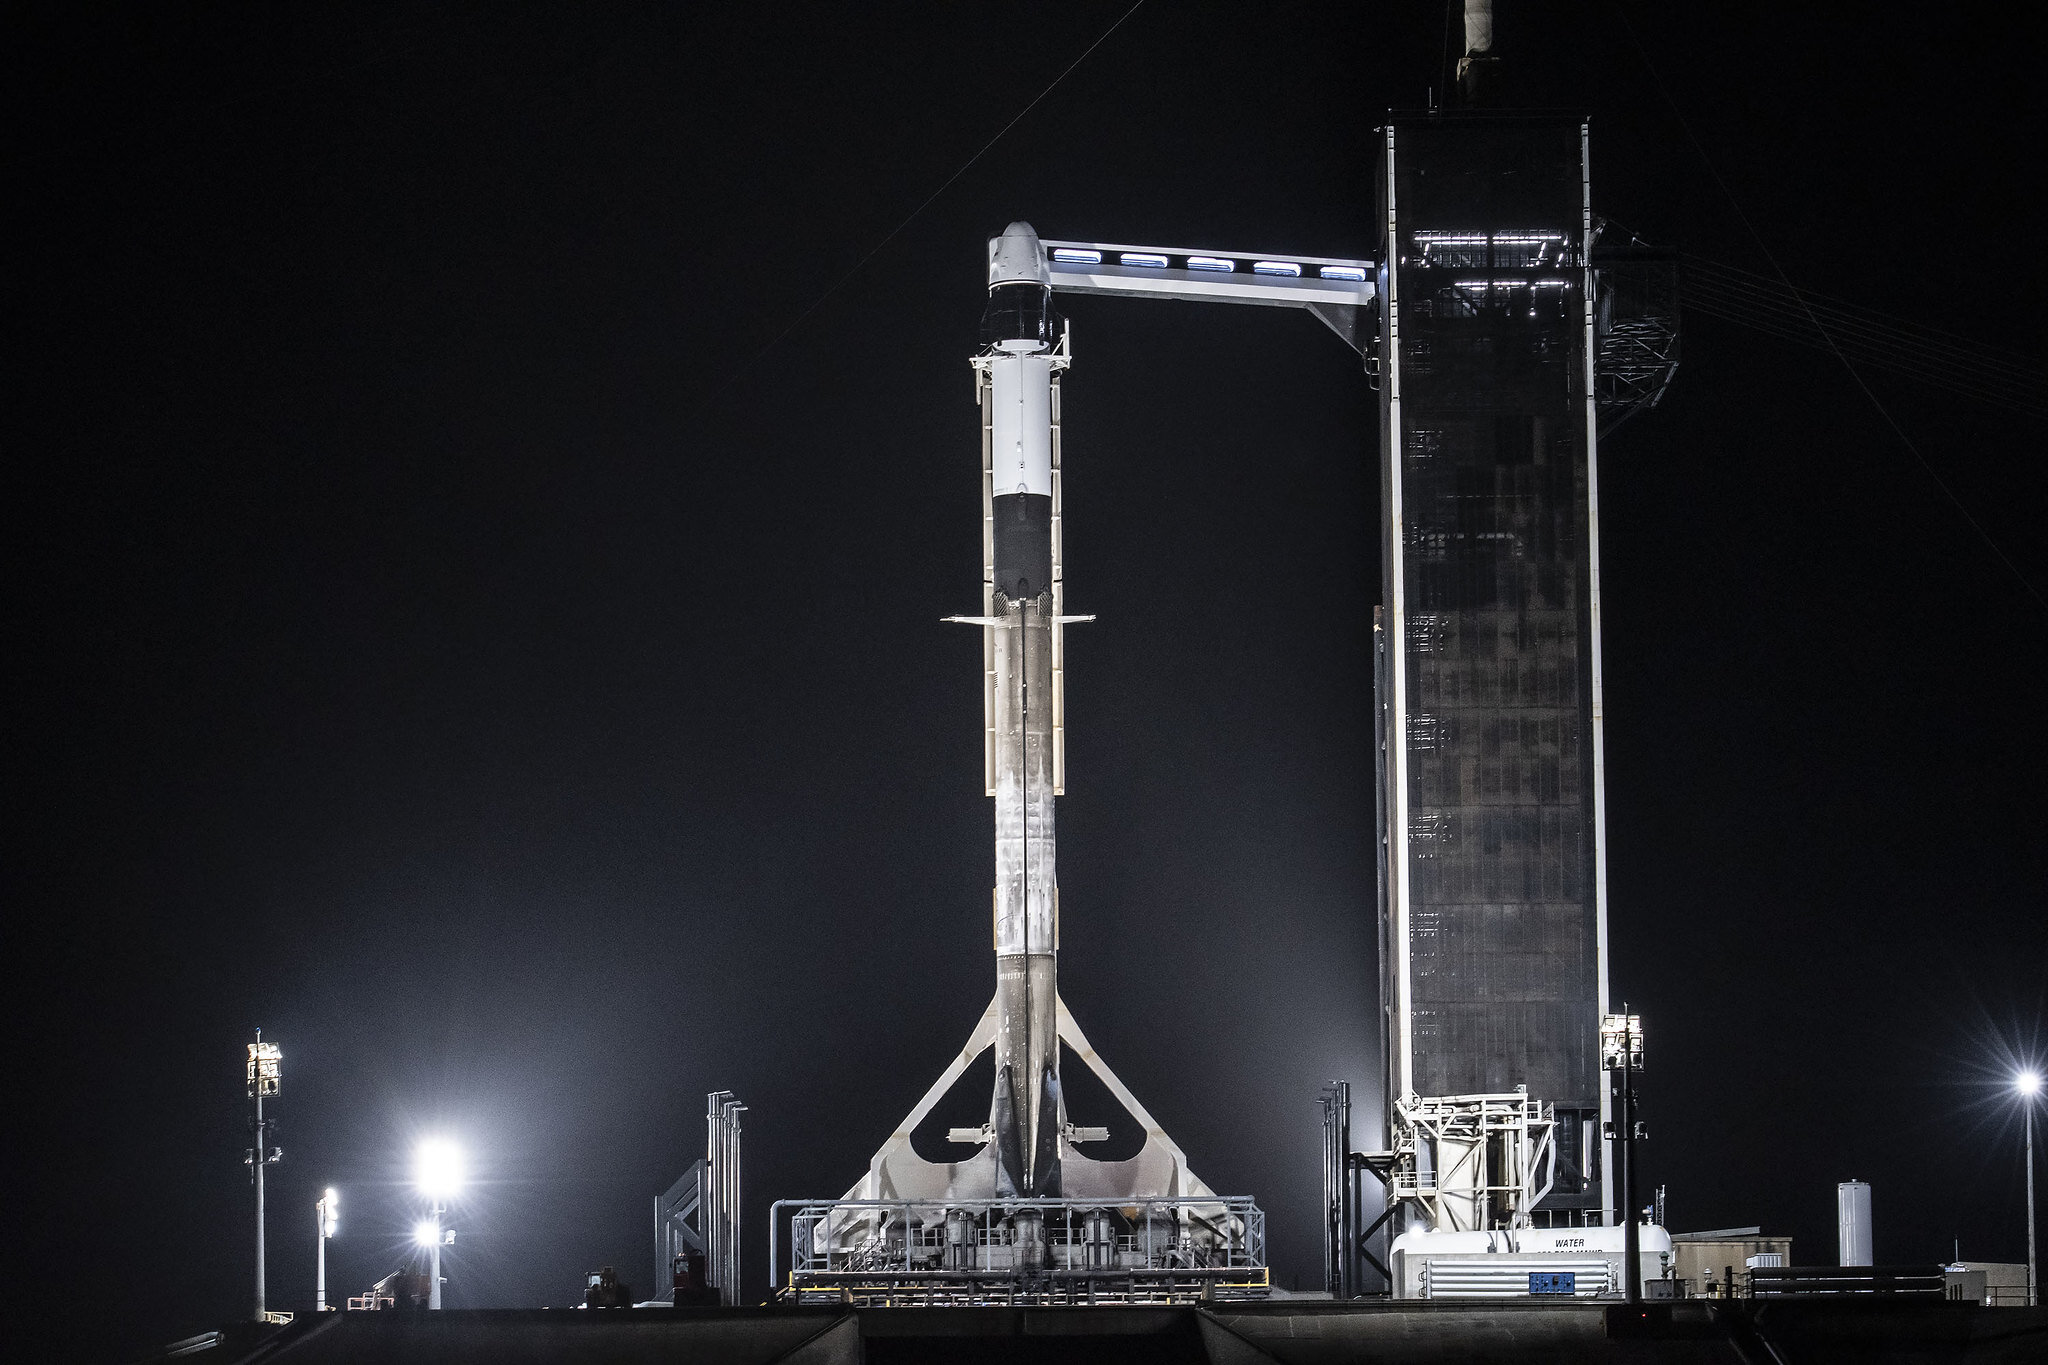 SpaceX Crew Dragon and Falcon 9 at Launch Pad 39A